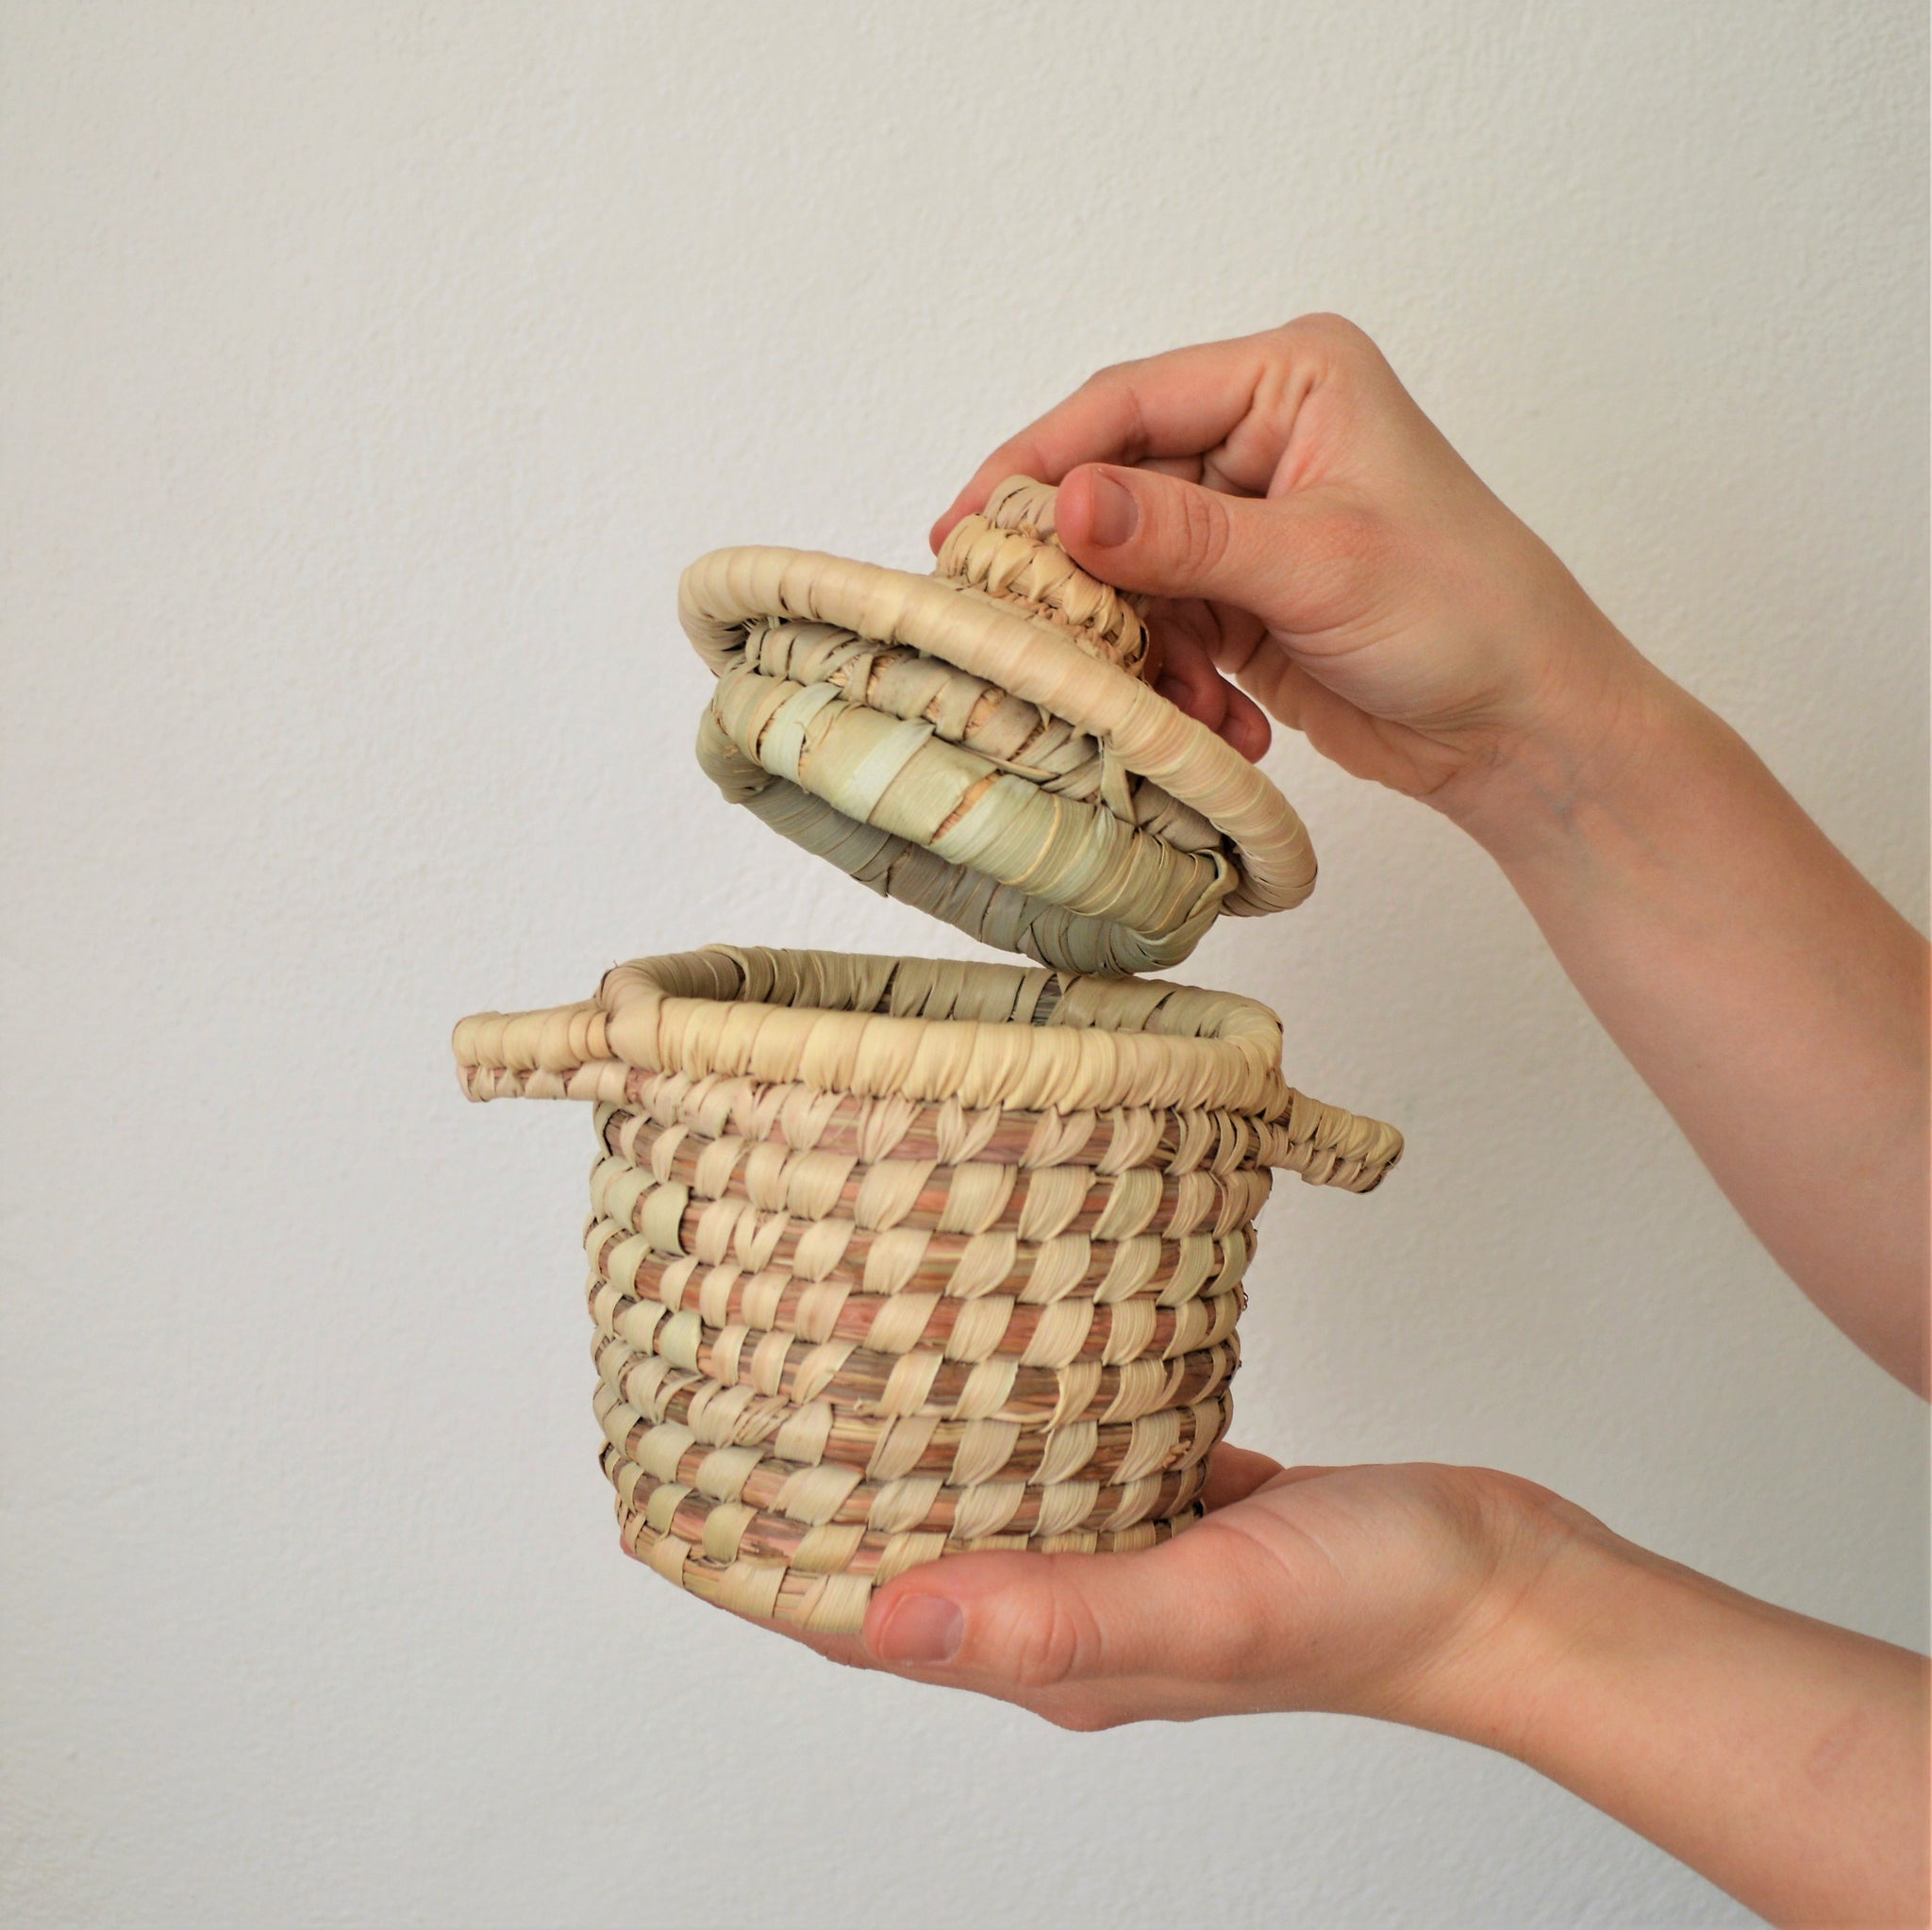 Wicker spices basket, Hand woven Palm leaf